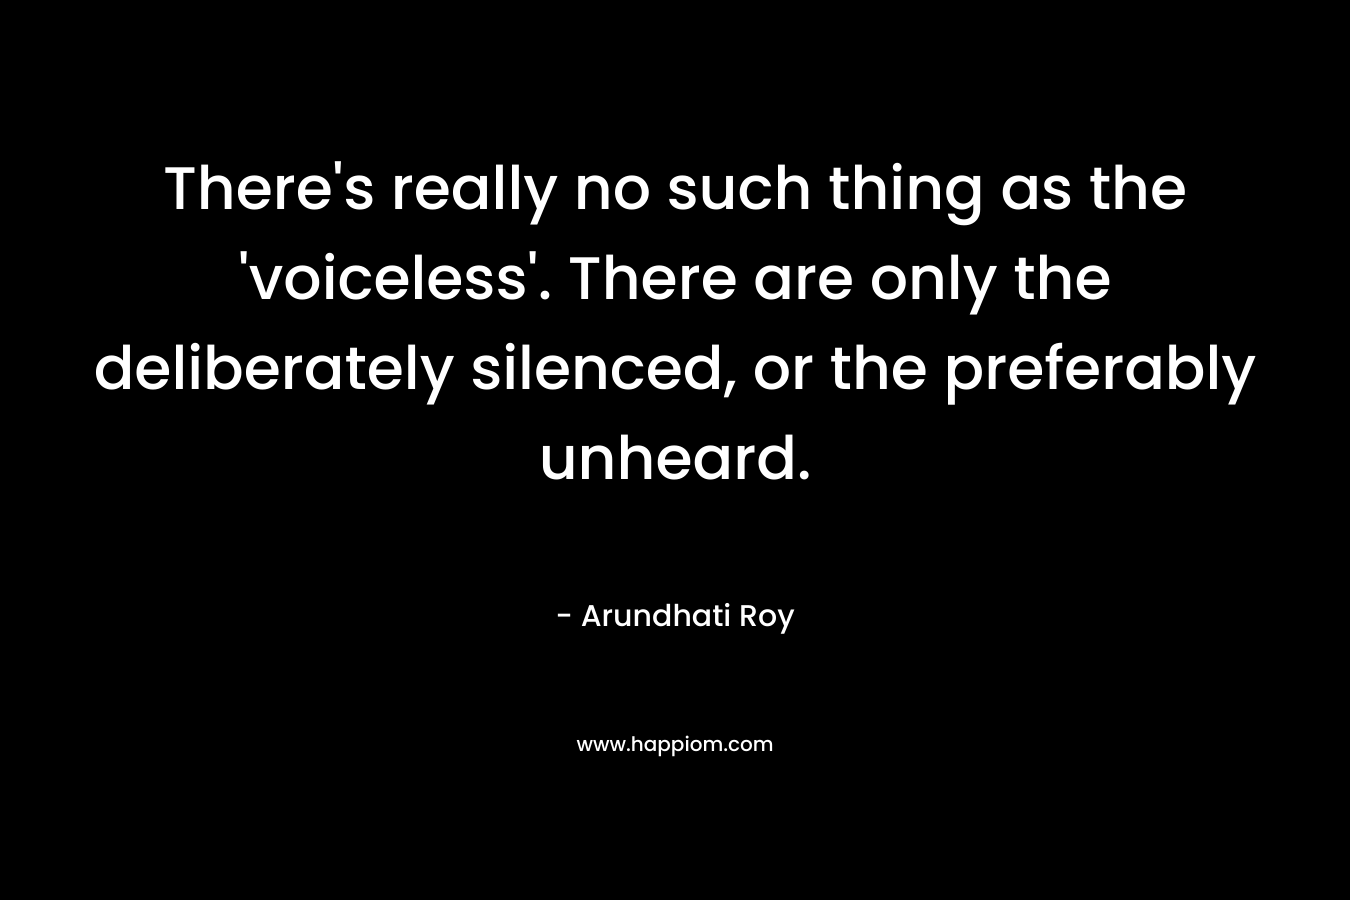 There’s really no such thing as the ‘voiceless’. There are only the deliberately silenced, or the preferably unheard. – Arundhati Roy